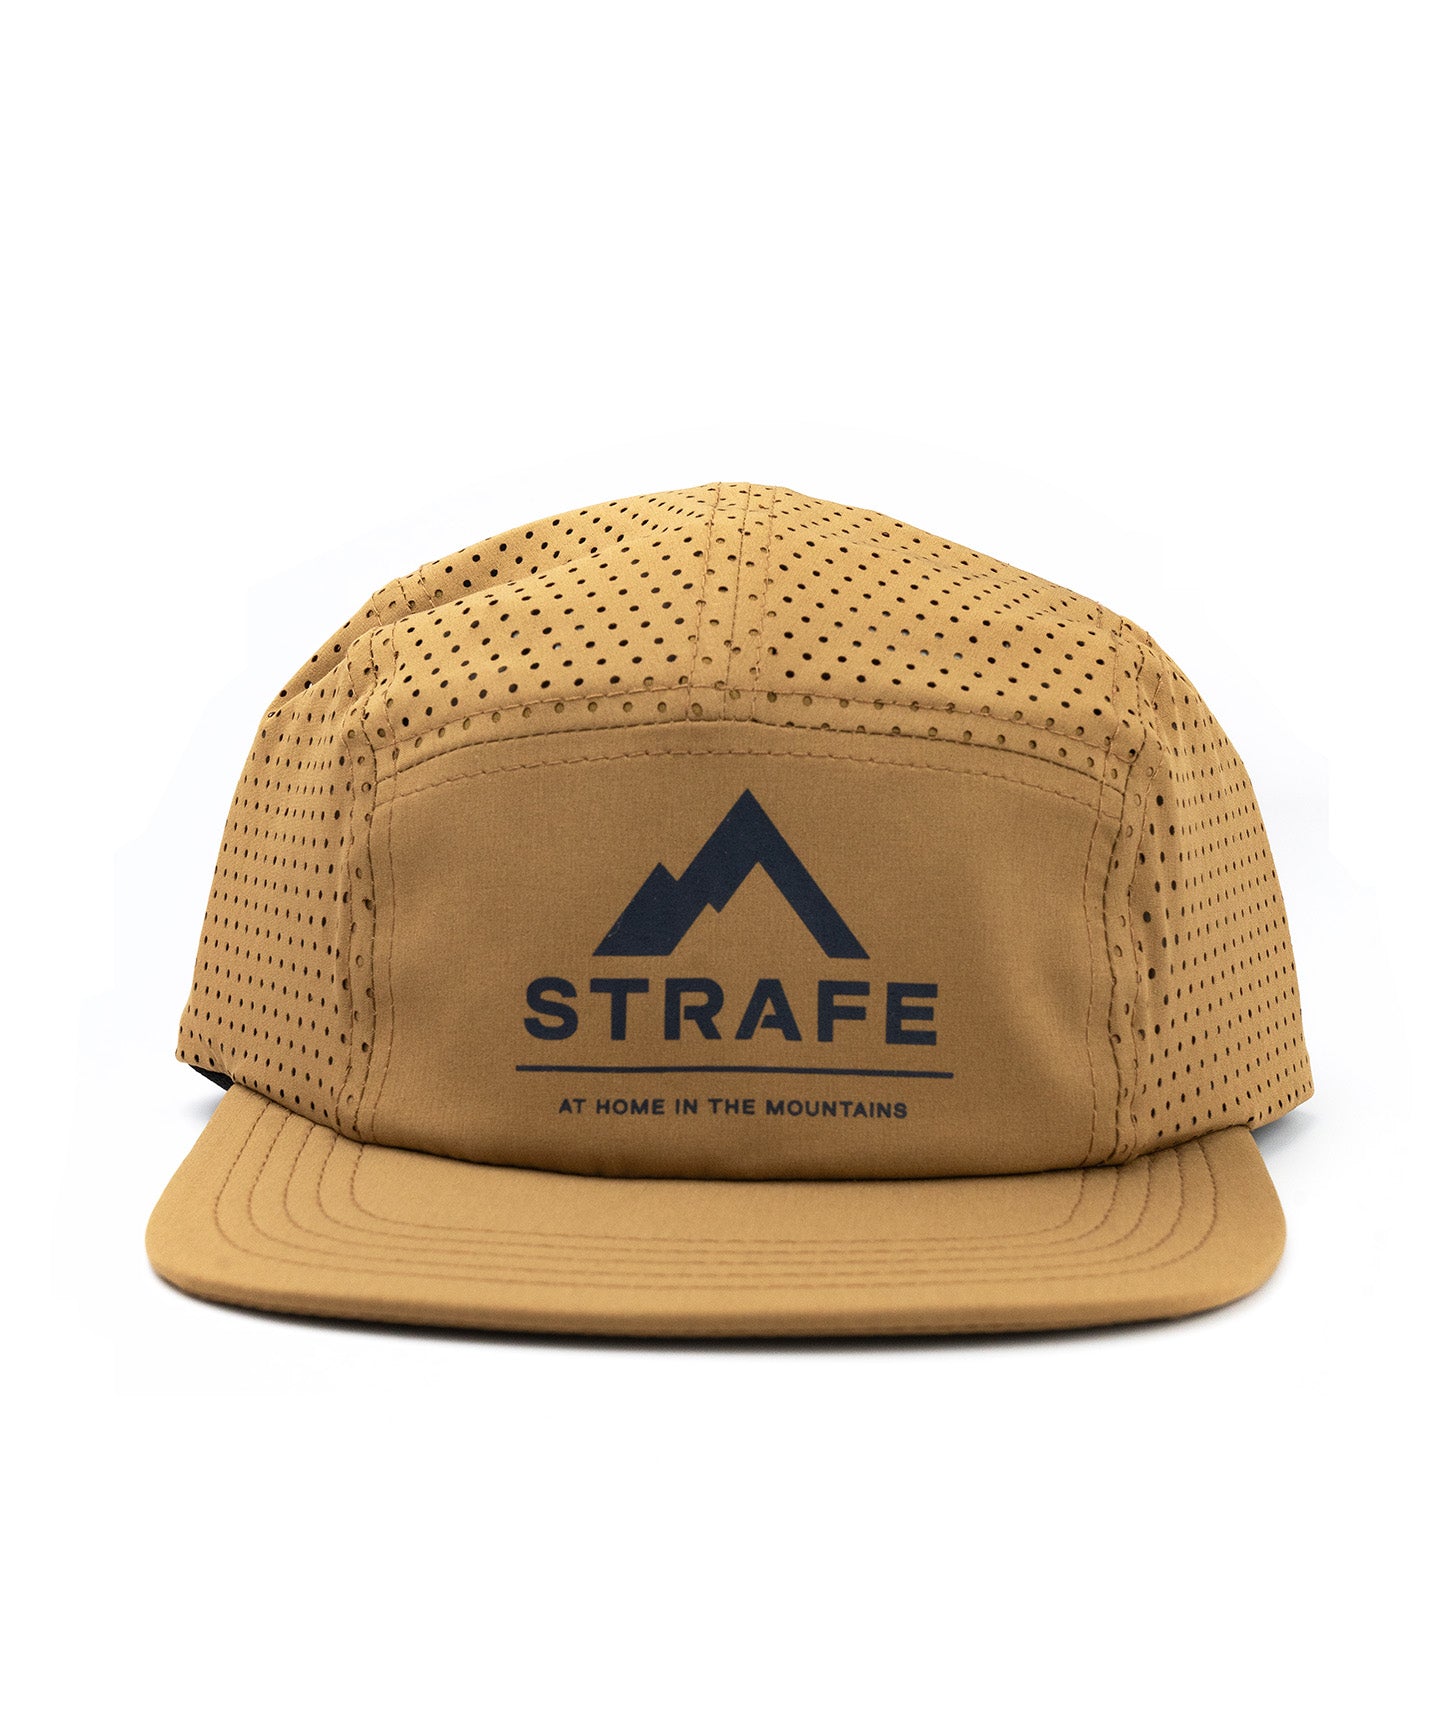 strafe outerwear fall/winter 23/24 collection banger touring hat in battleship 